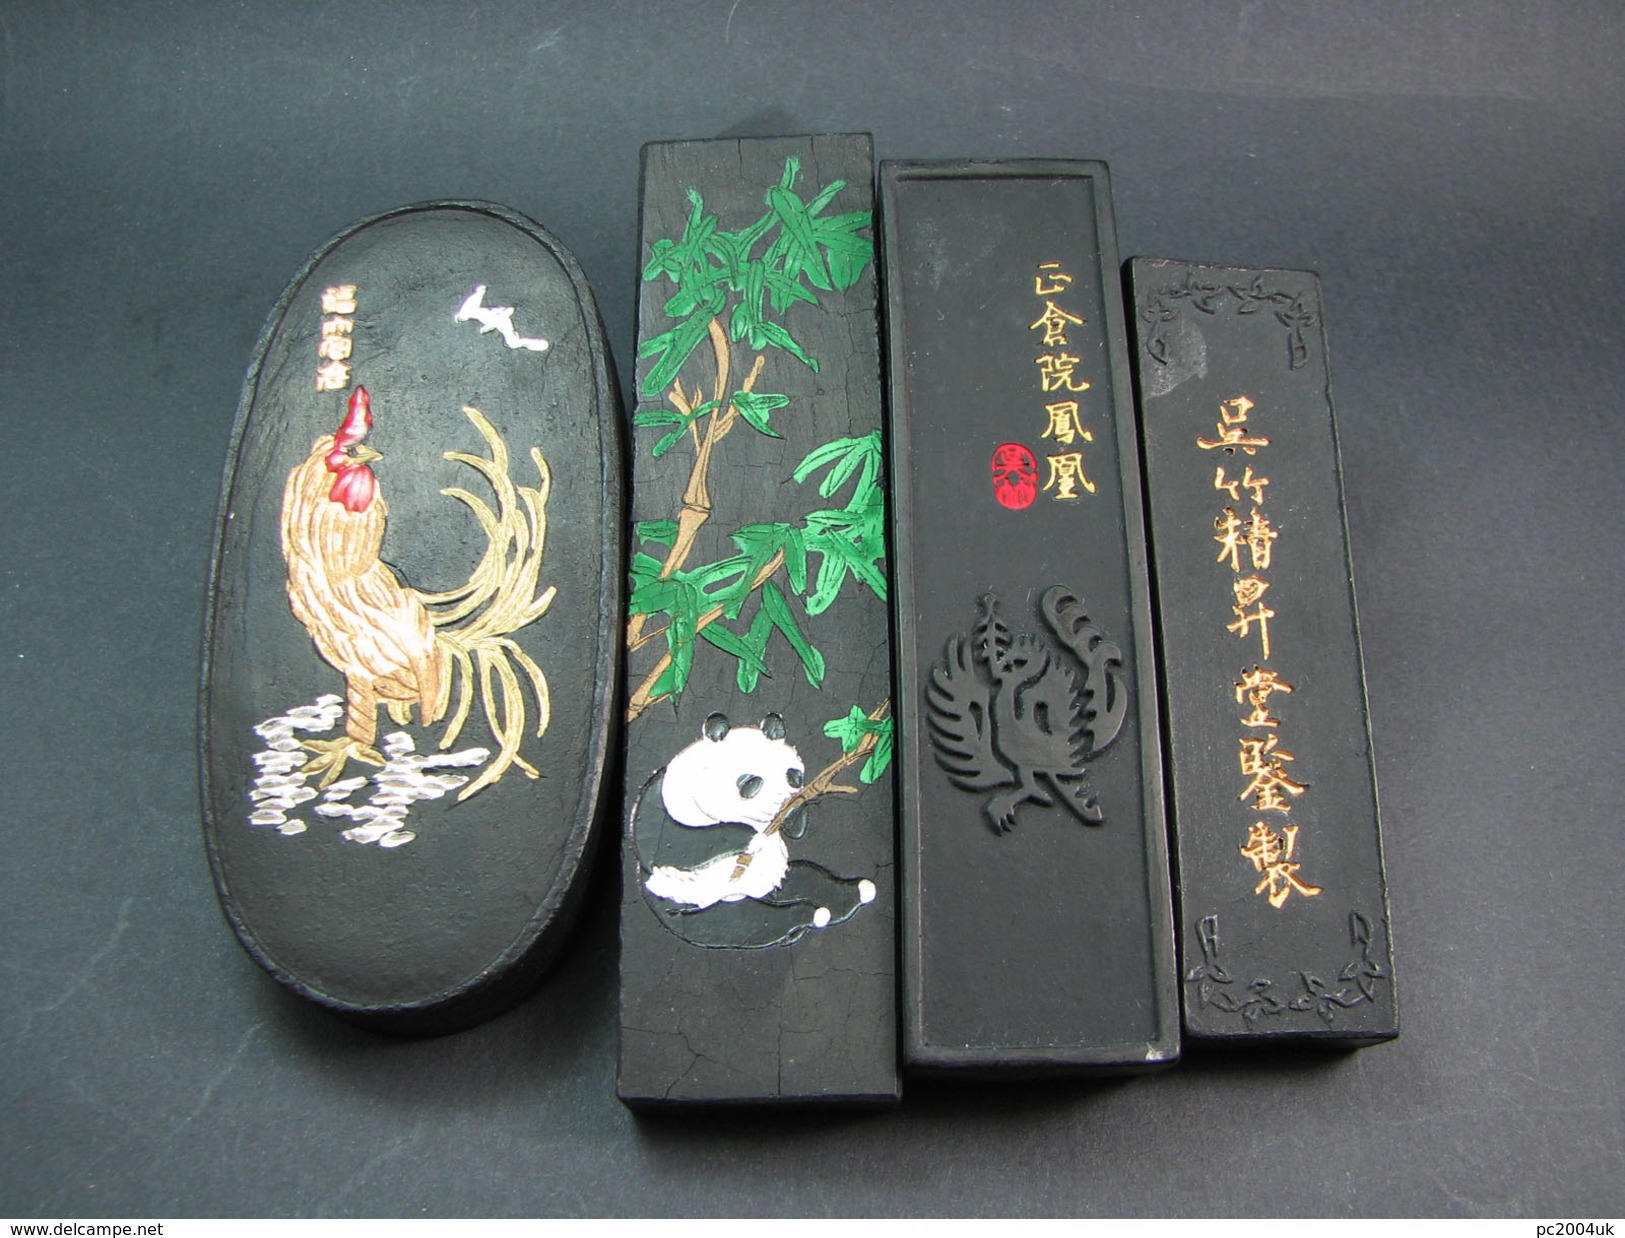 FREE SHIPPING. Four Boxed And Decorated Vintage Ink Sticks - China/Japan - Circa 1960's.  FREE SHIPPING. - Oriental Art